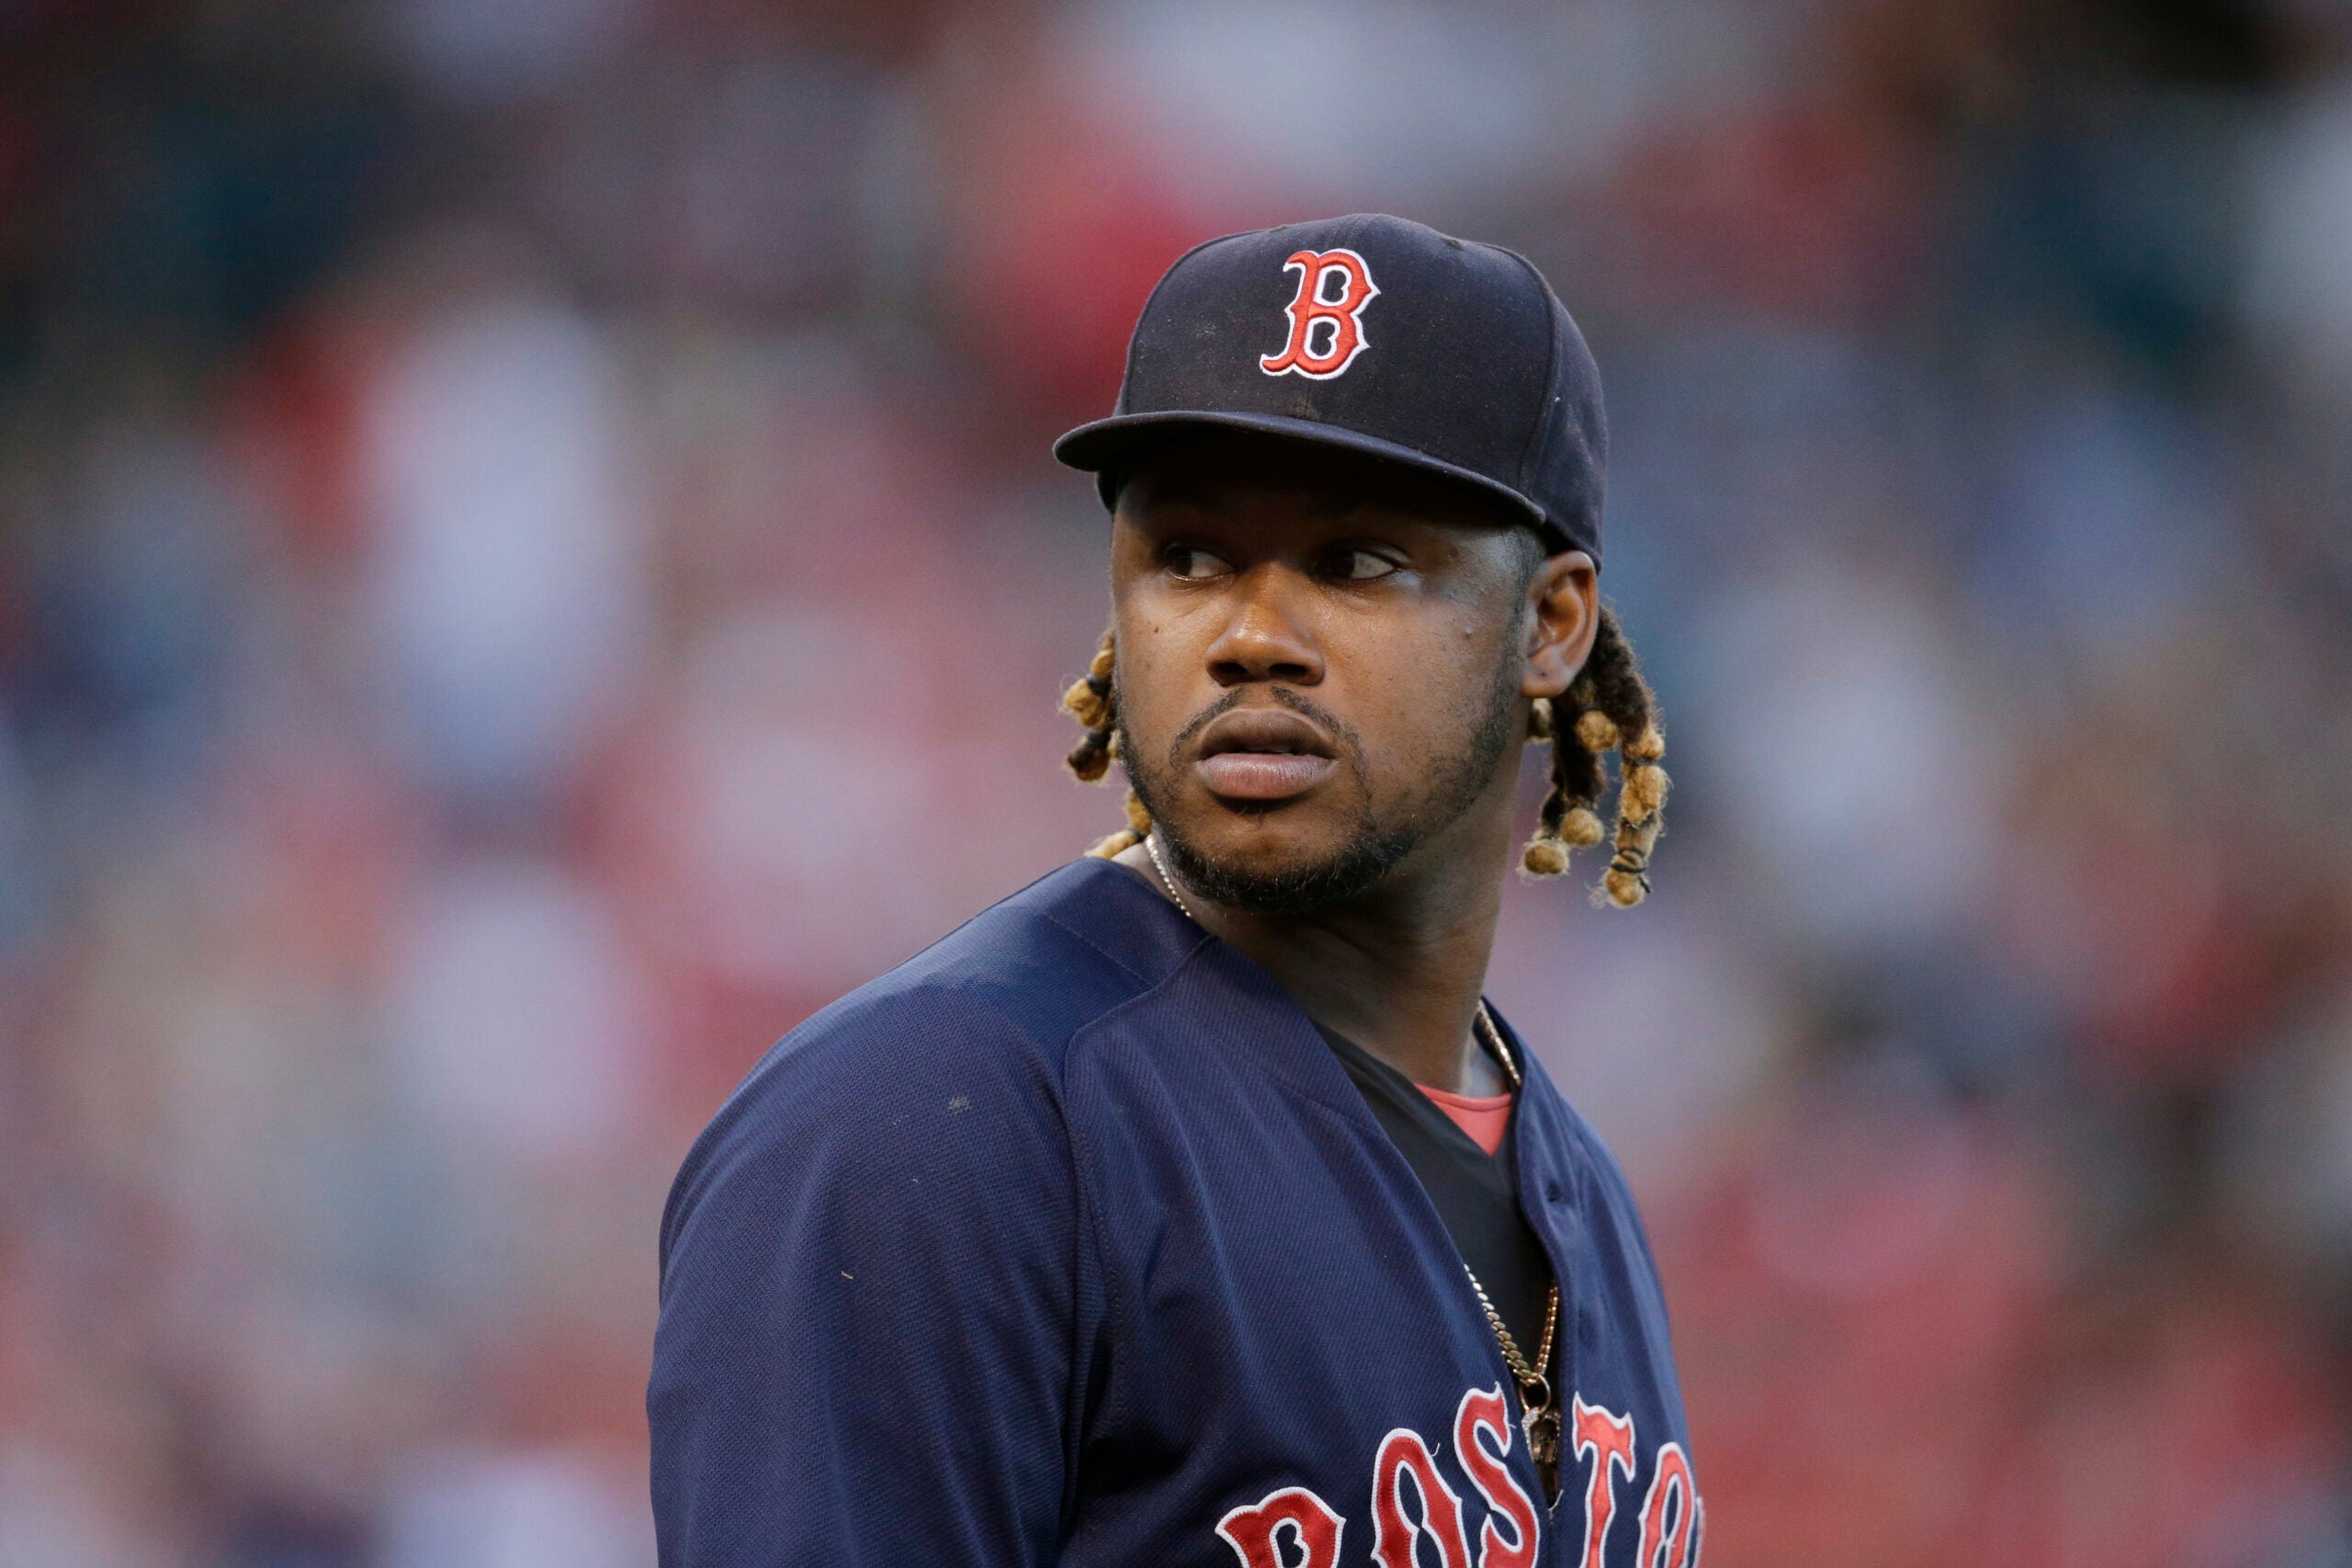 Here's video evidence of Hanley Ramirez making a couple decent